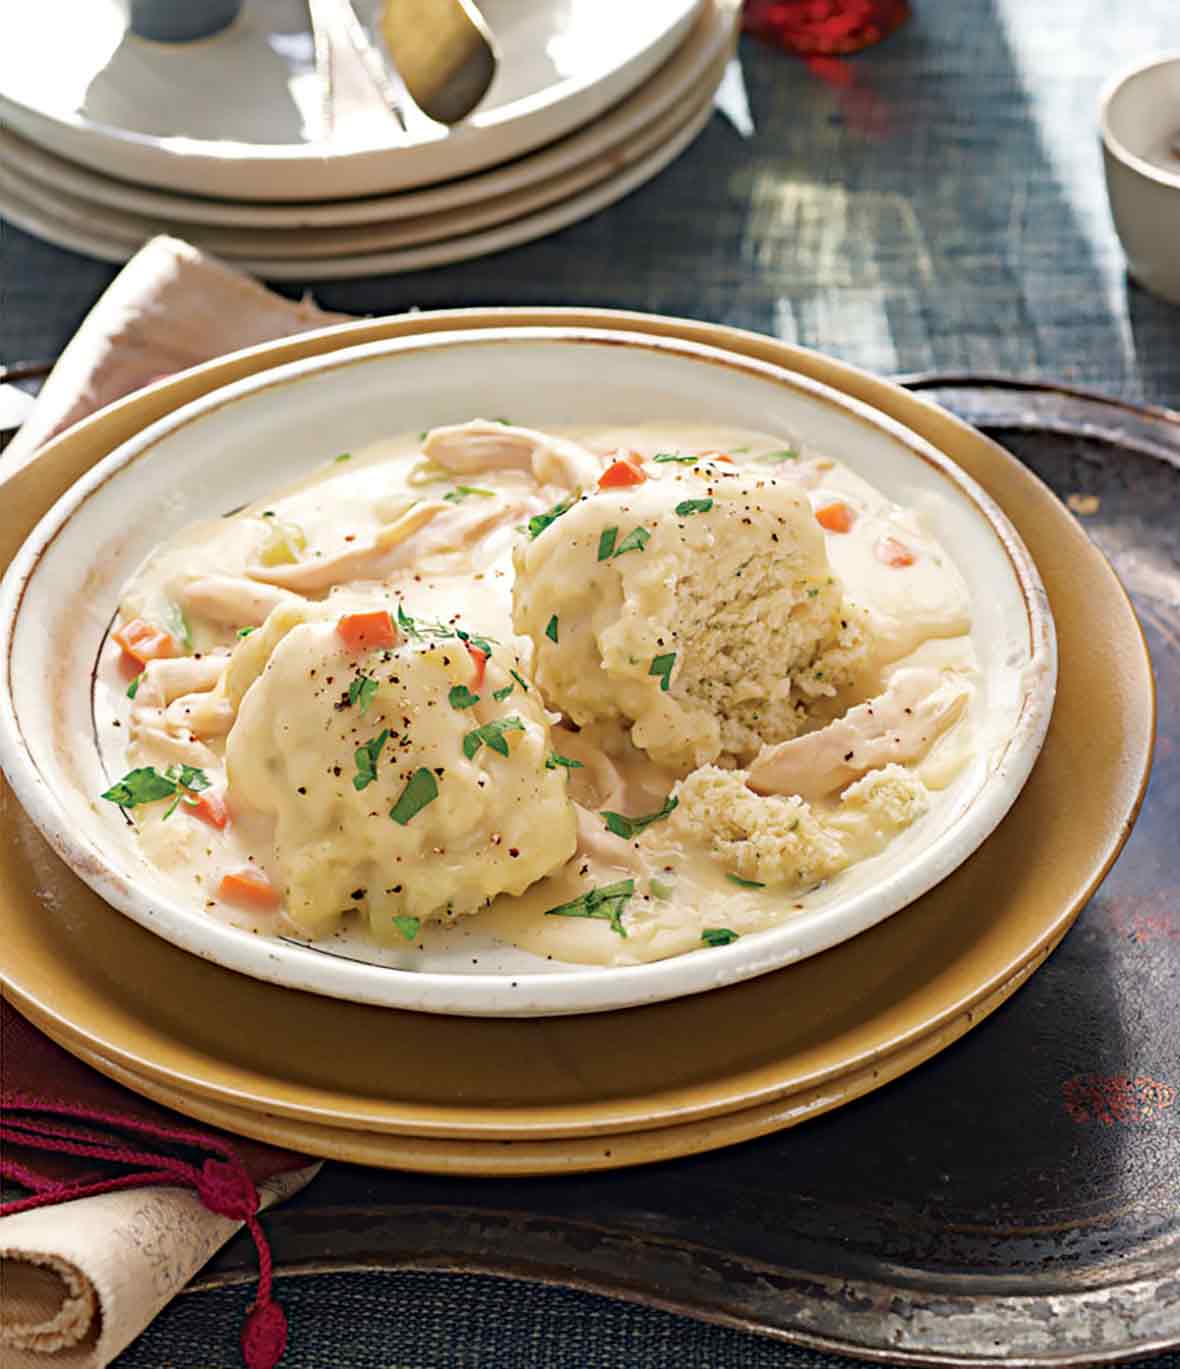 A bowl of chicken ad dumplings on a plate resting on an antique tray.